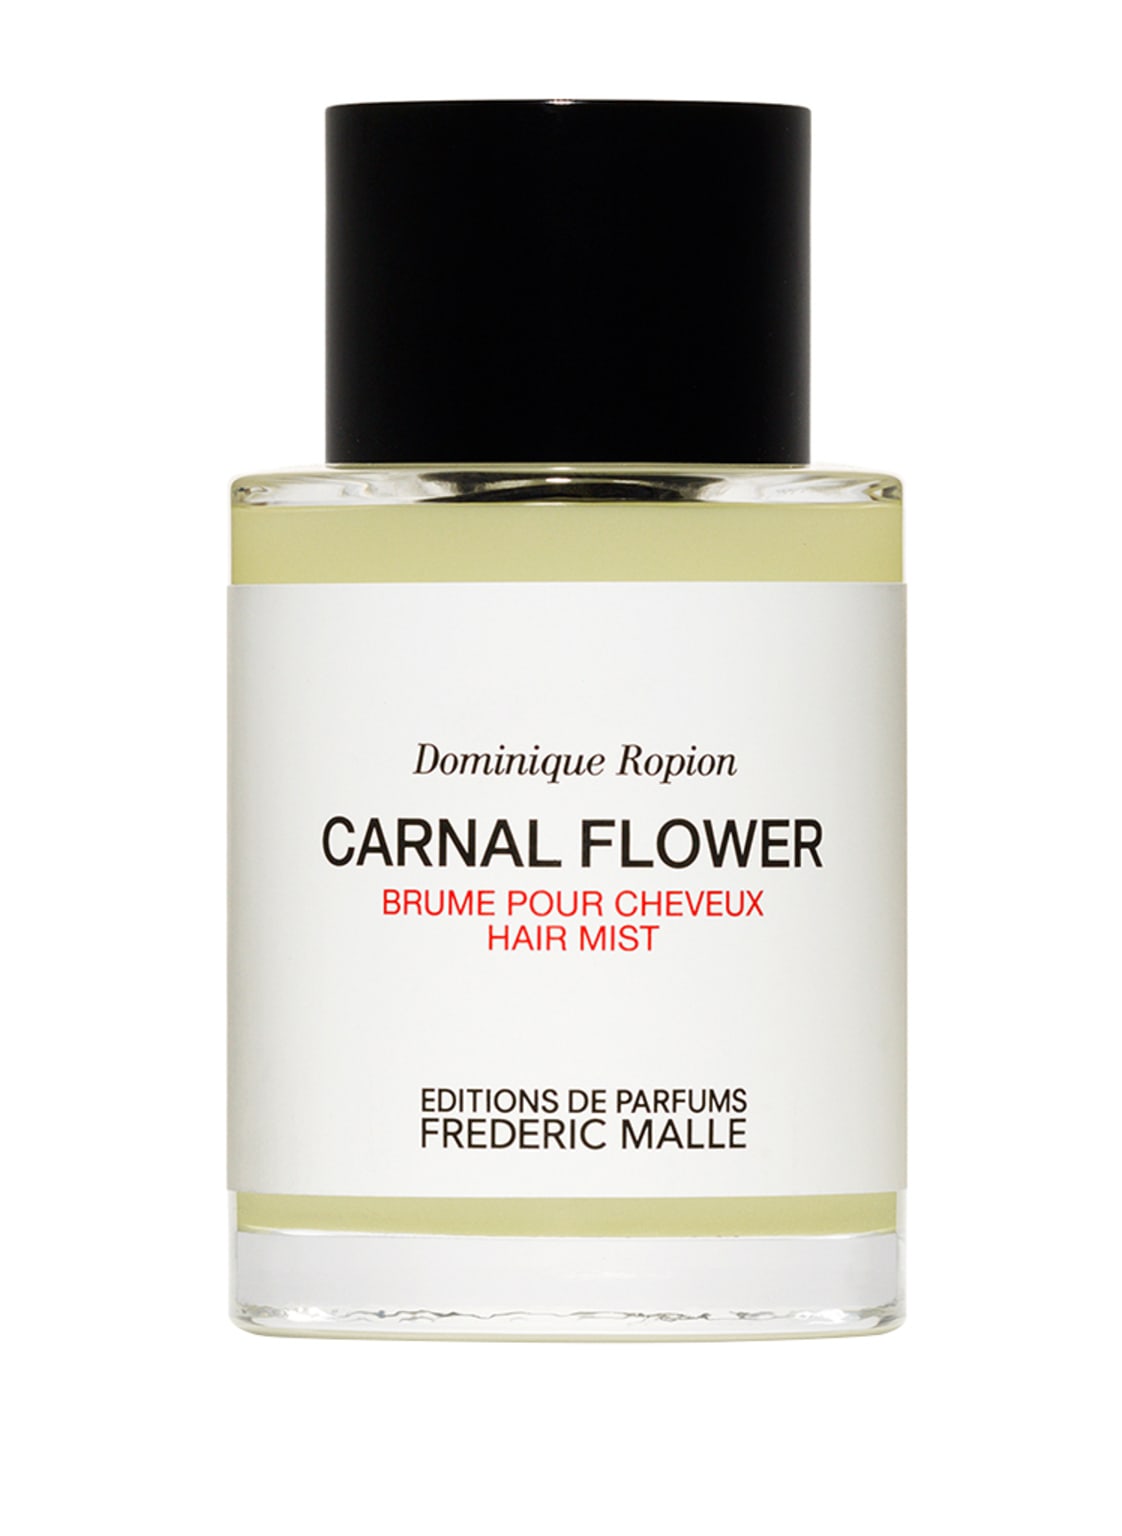 Editions De Parfums Frederic Malle Carnal Flower Hair Mist 100 ml von EDITIONS DE PARFUMS FREDERIC MALLE